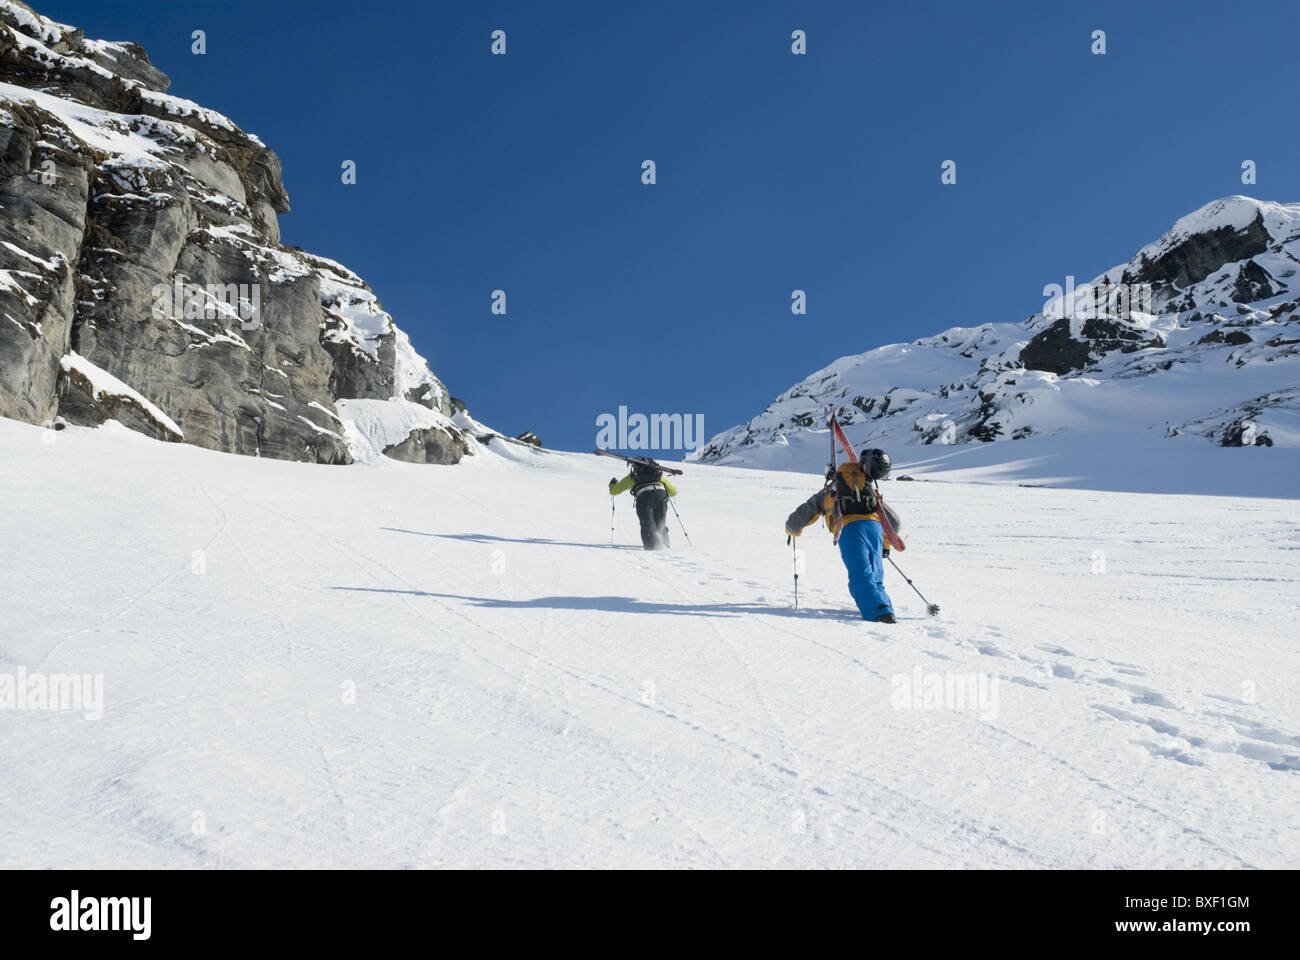 Two free skiers climbing up a snowy mountain side near Narvik, Norway Stock Photo